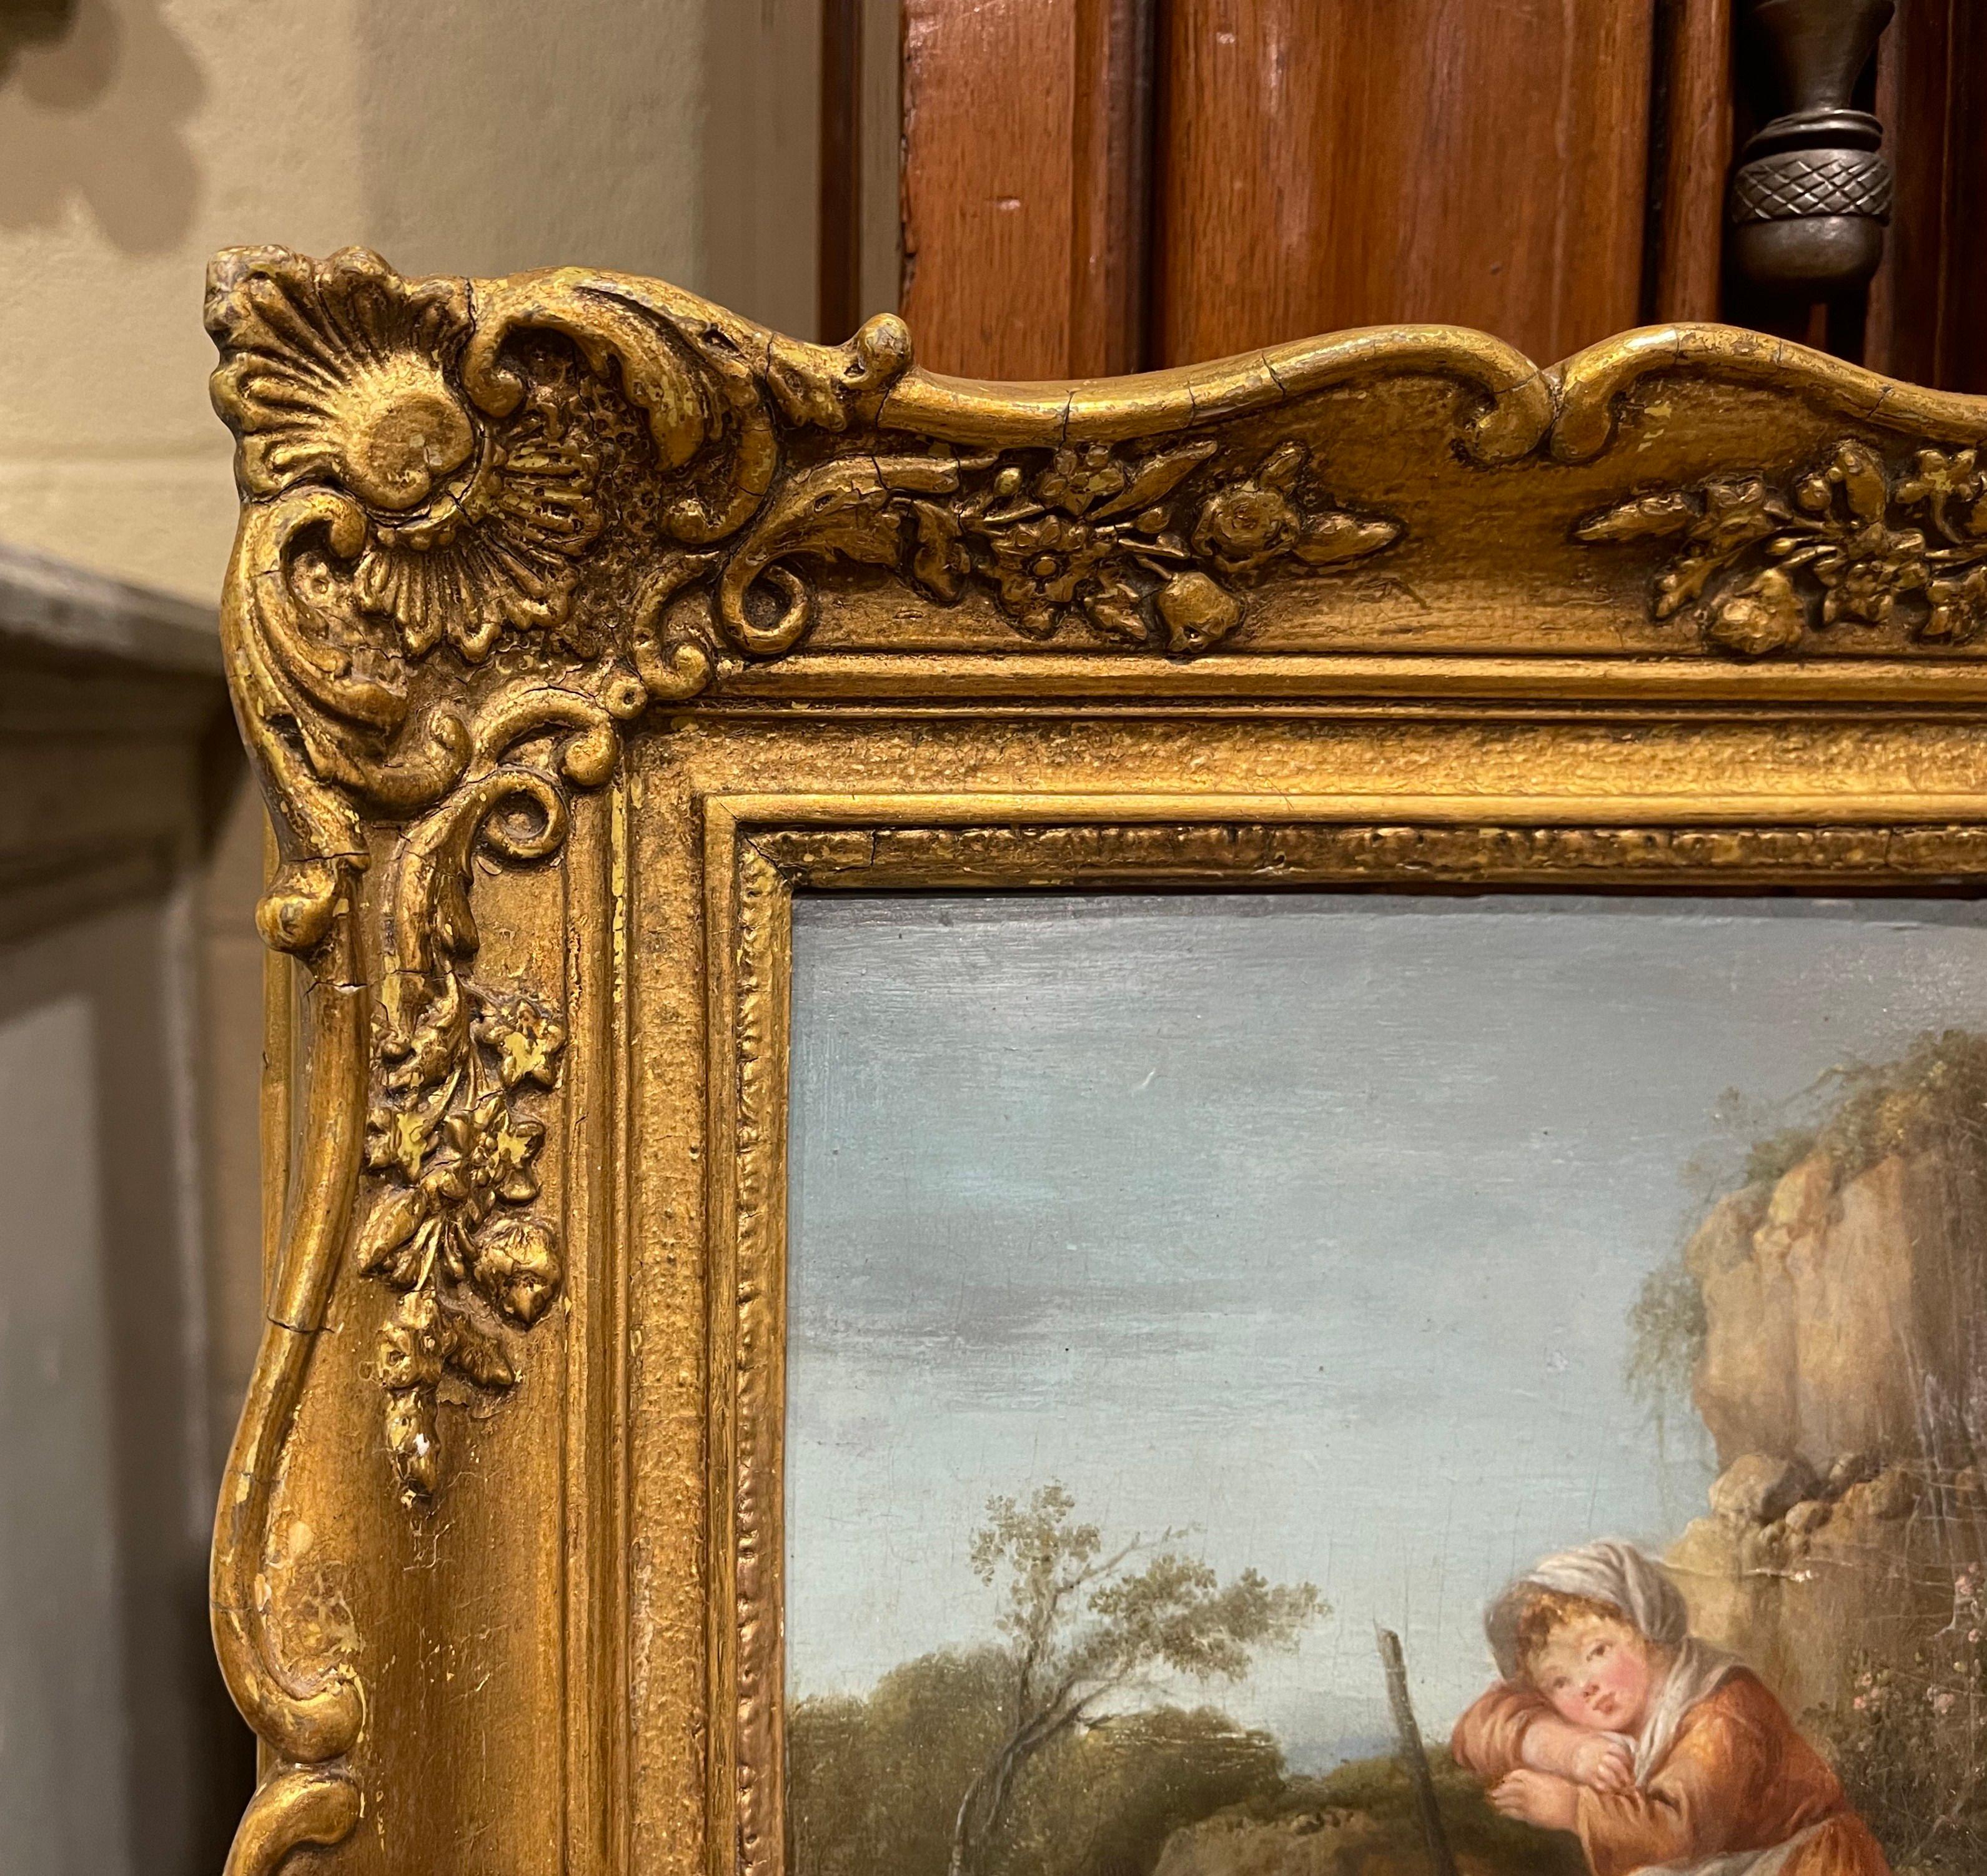 18th Century British Oil on Board Sheep Painting Attributed to F. Wheatley  In Excellent Condition For Sale In Dallas, TX